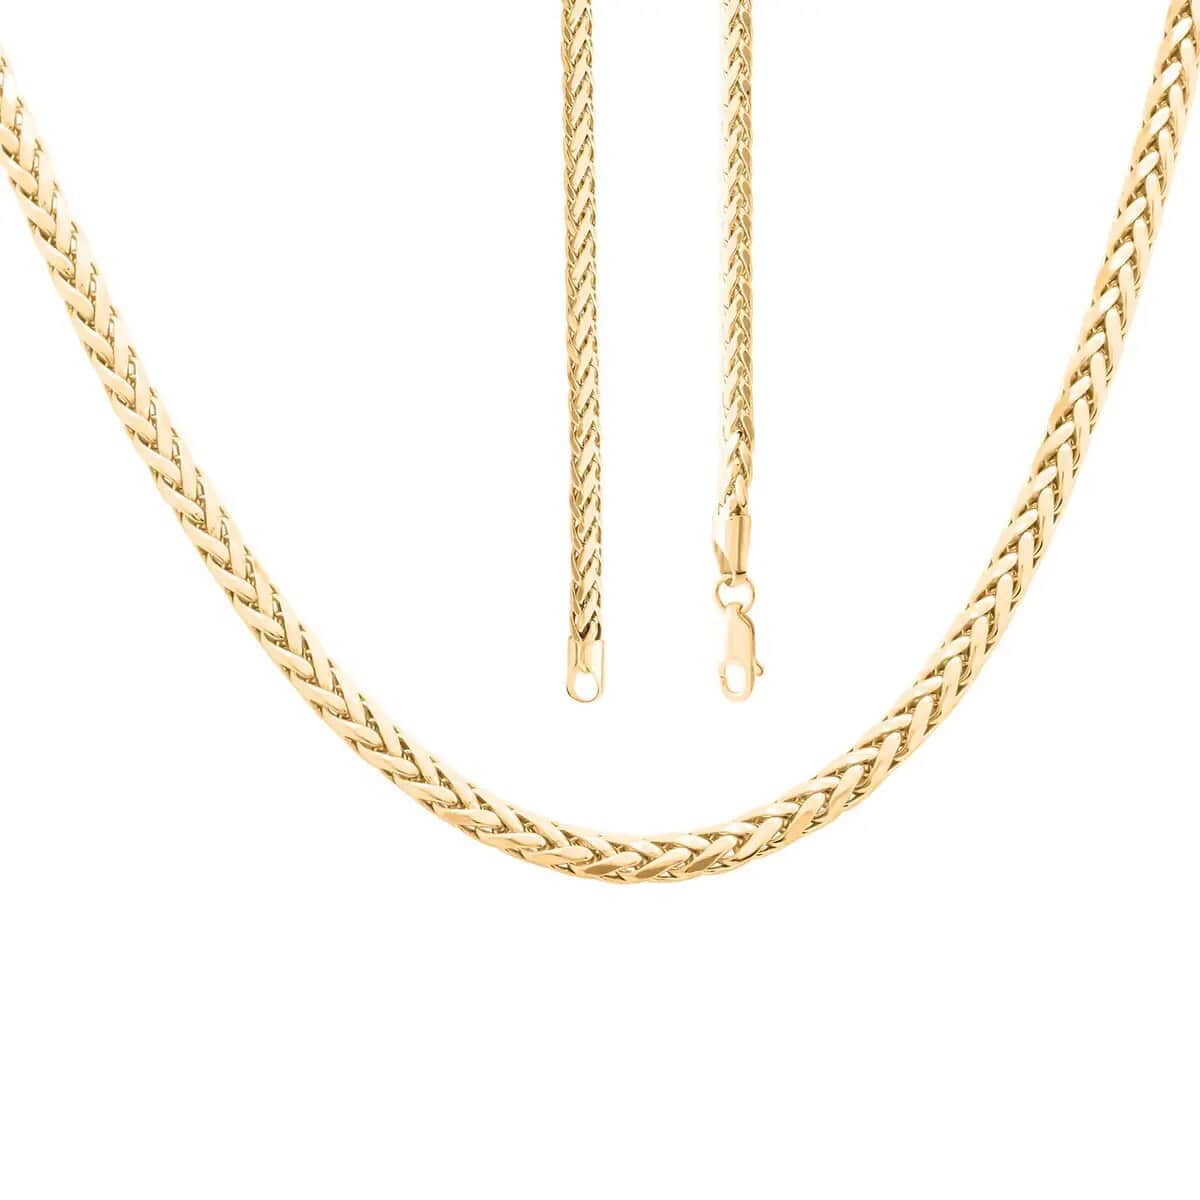 Palma Chain Necklace in 10K Yellow Gold, Gold Palma Necklace, 22 Inch Necklace, Gold Gifts 3mm 8.90Grams image number 4